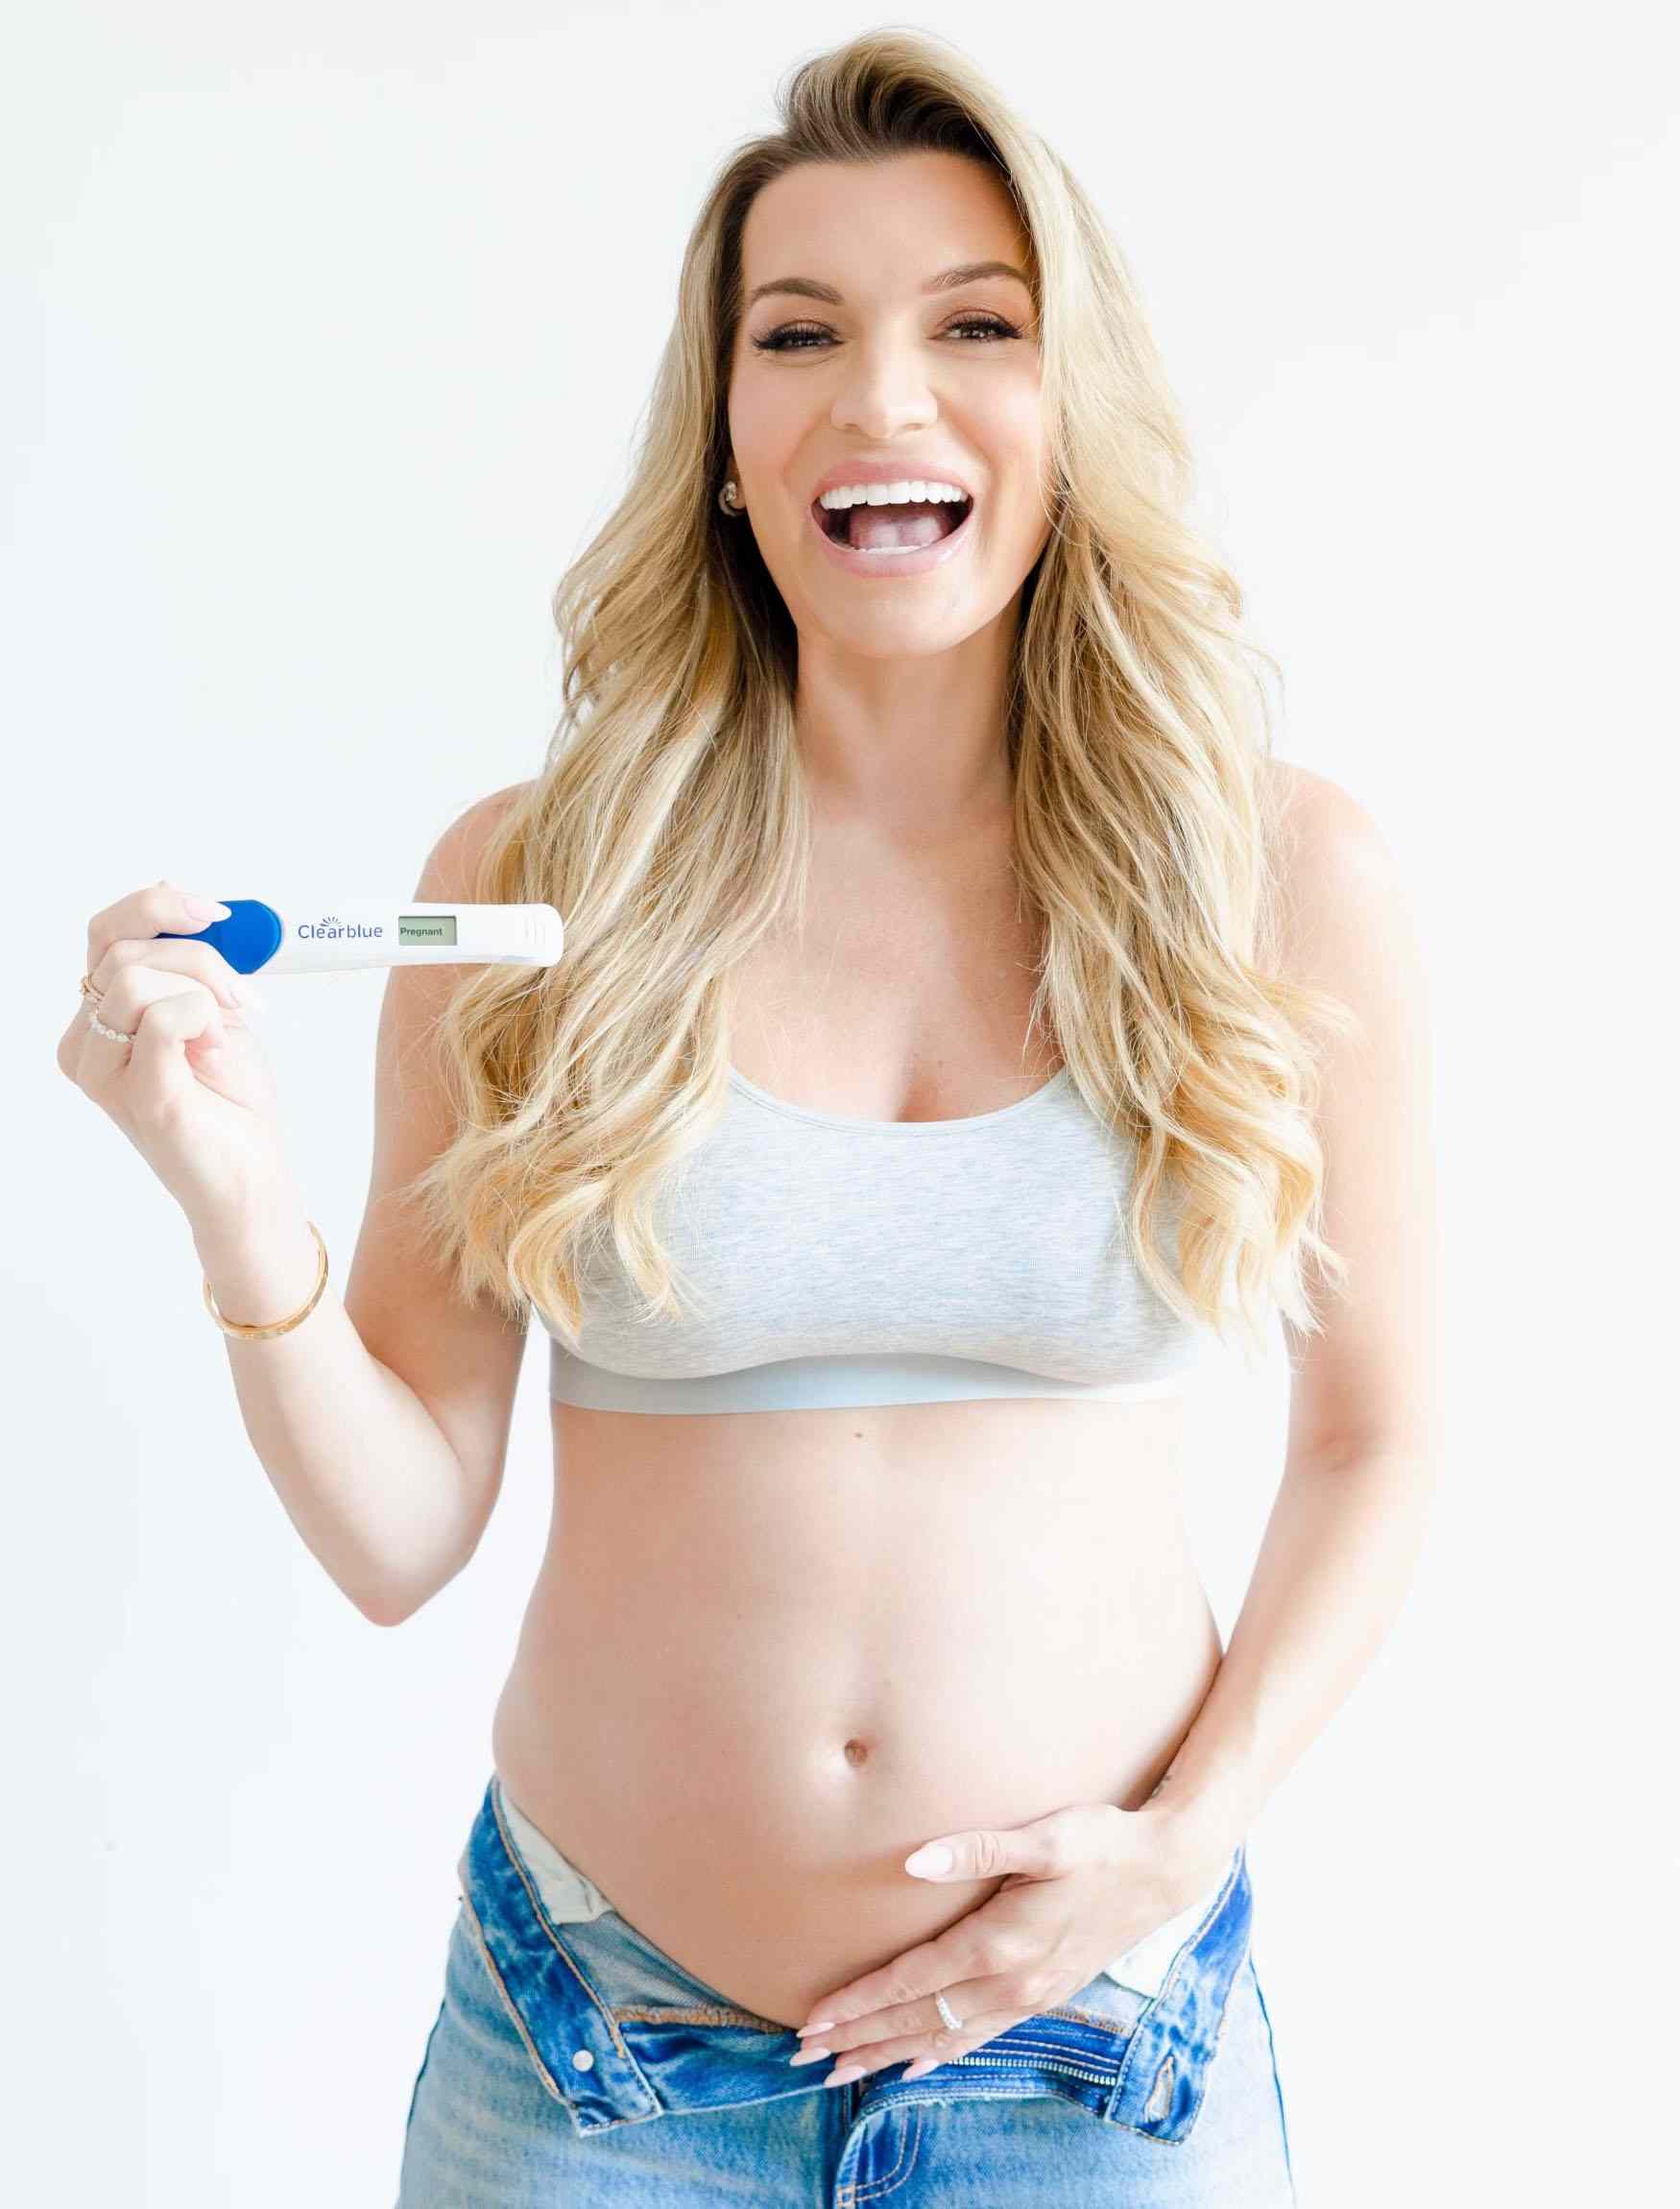 Lindsay Hubbard Is Pregnant! “Summer House ”Star Reveals She's Expecting Her First Baby